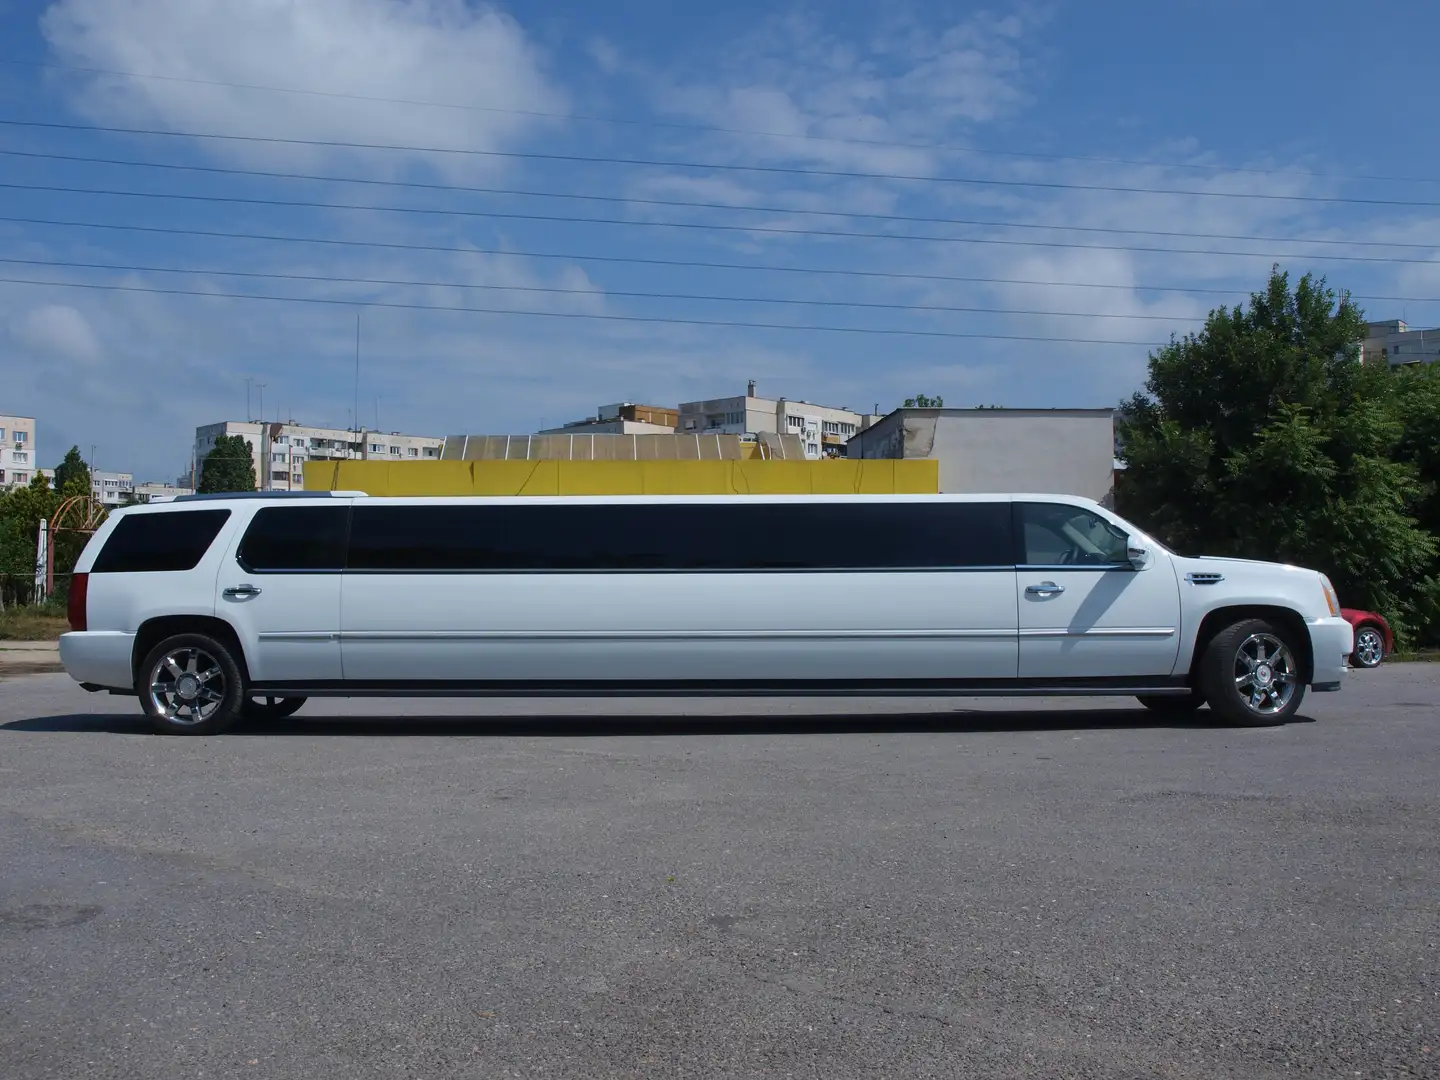 Cadillac Escalade 203-inch Stretch Limousine by Moonlight Industries Weiß - 2